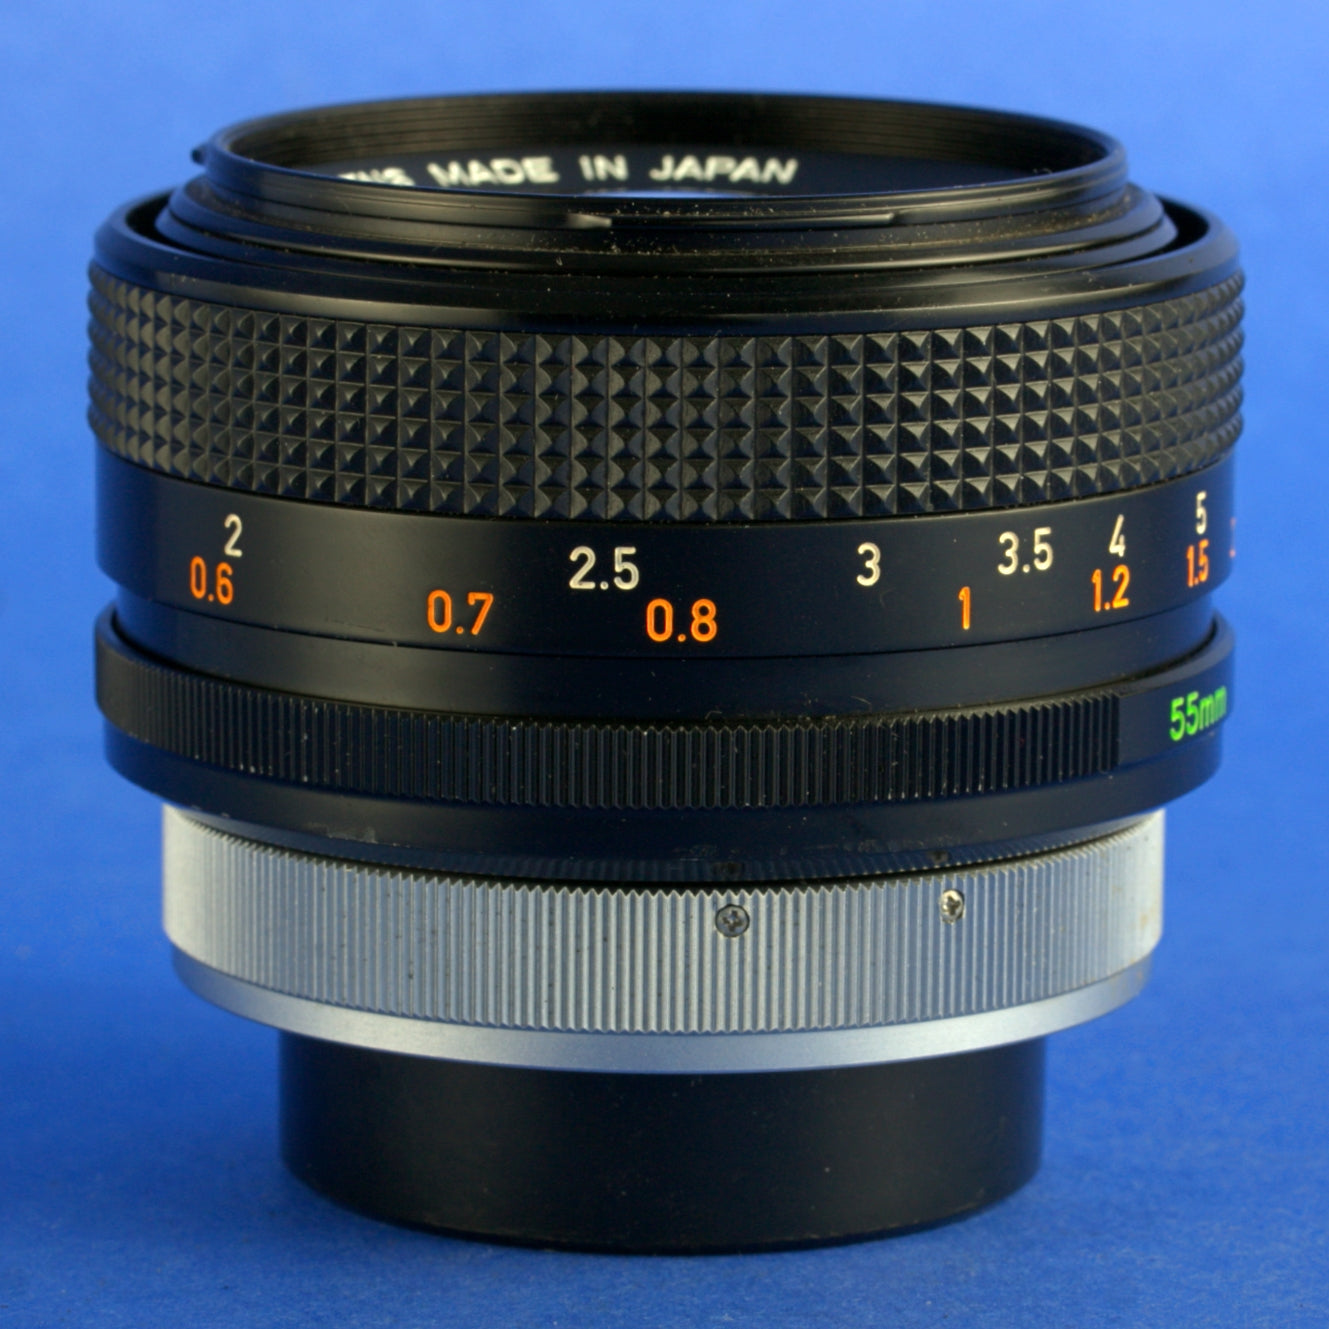 Canon FD 55mm 1.2 S.S.C. Lens Beautiful Condition